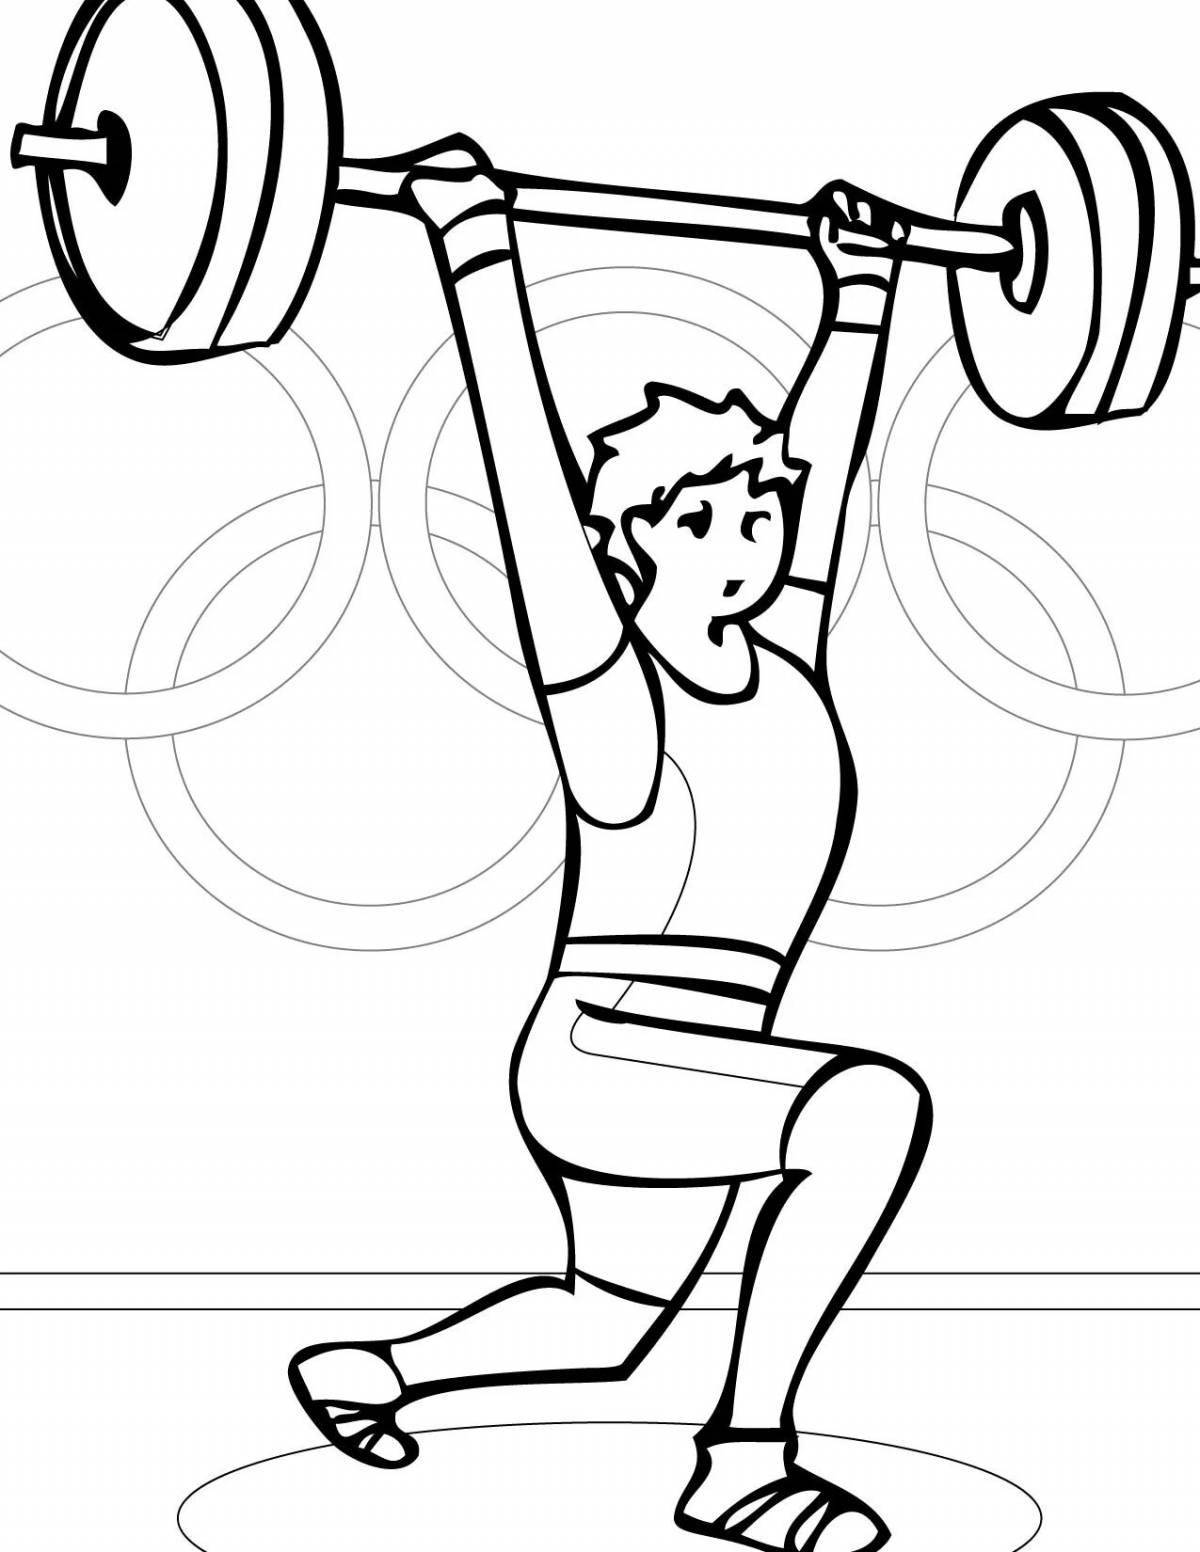 Colorful weightlifter coloring page